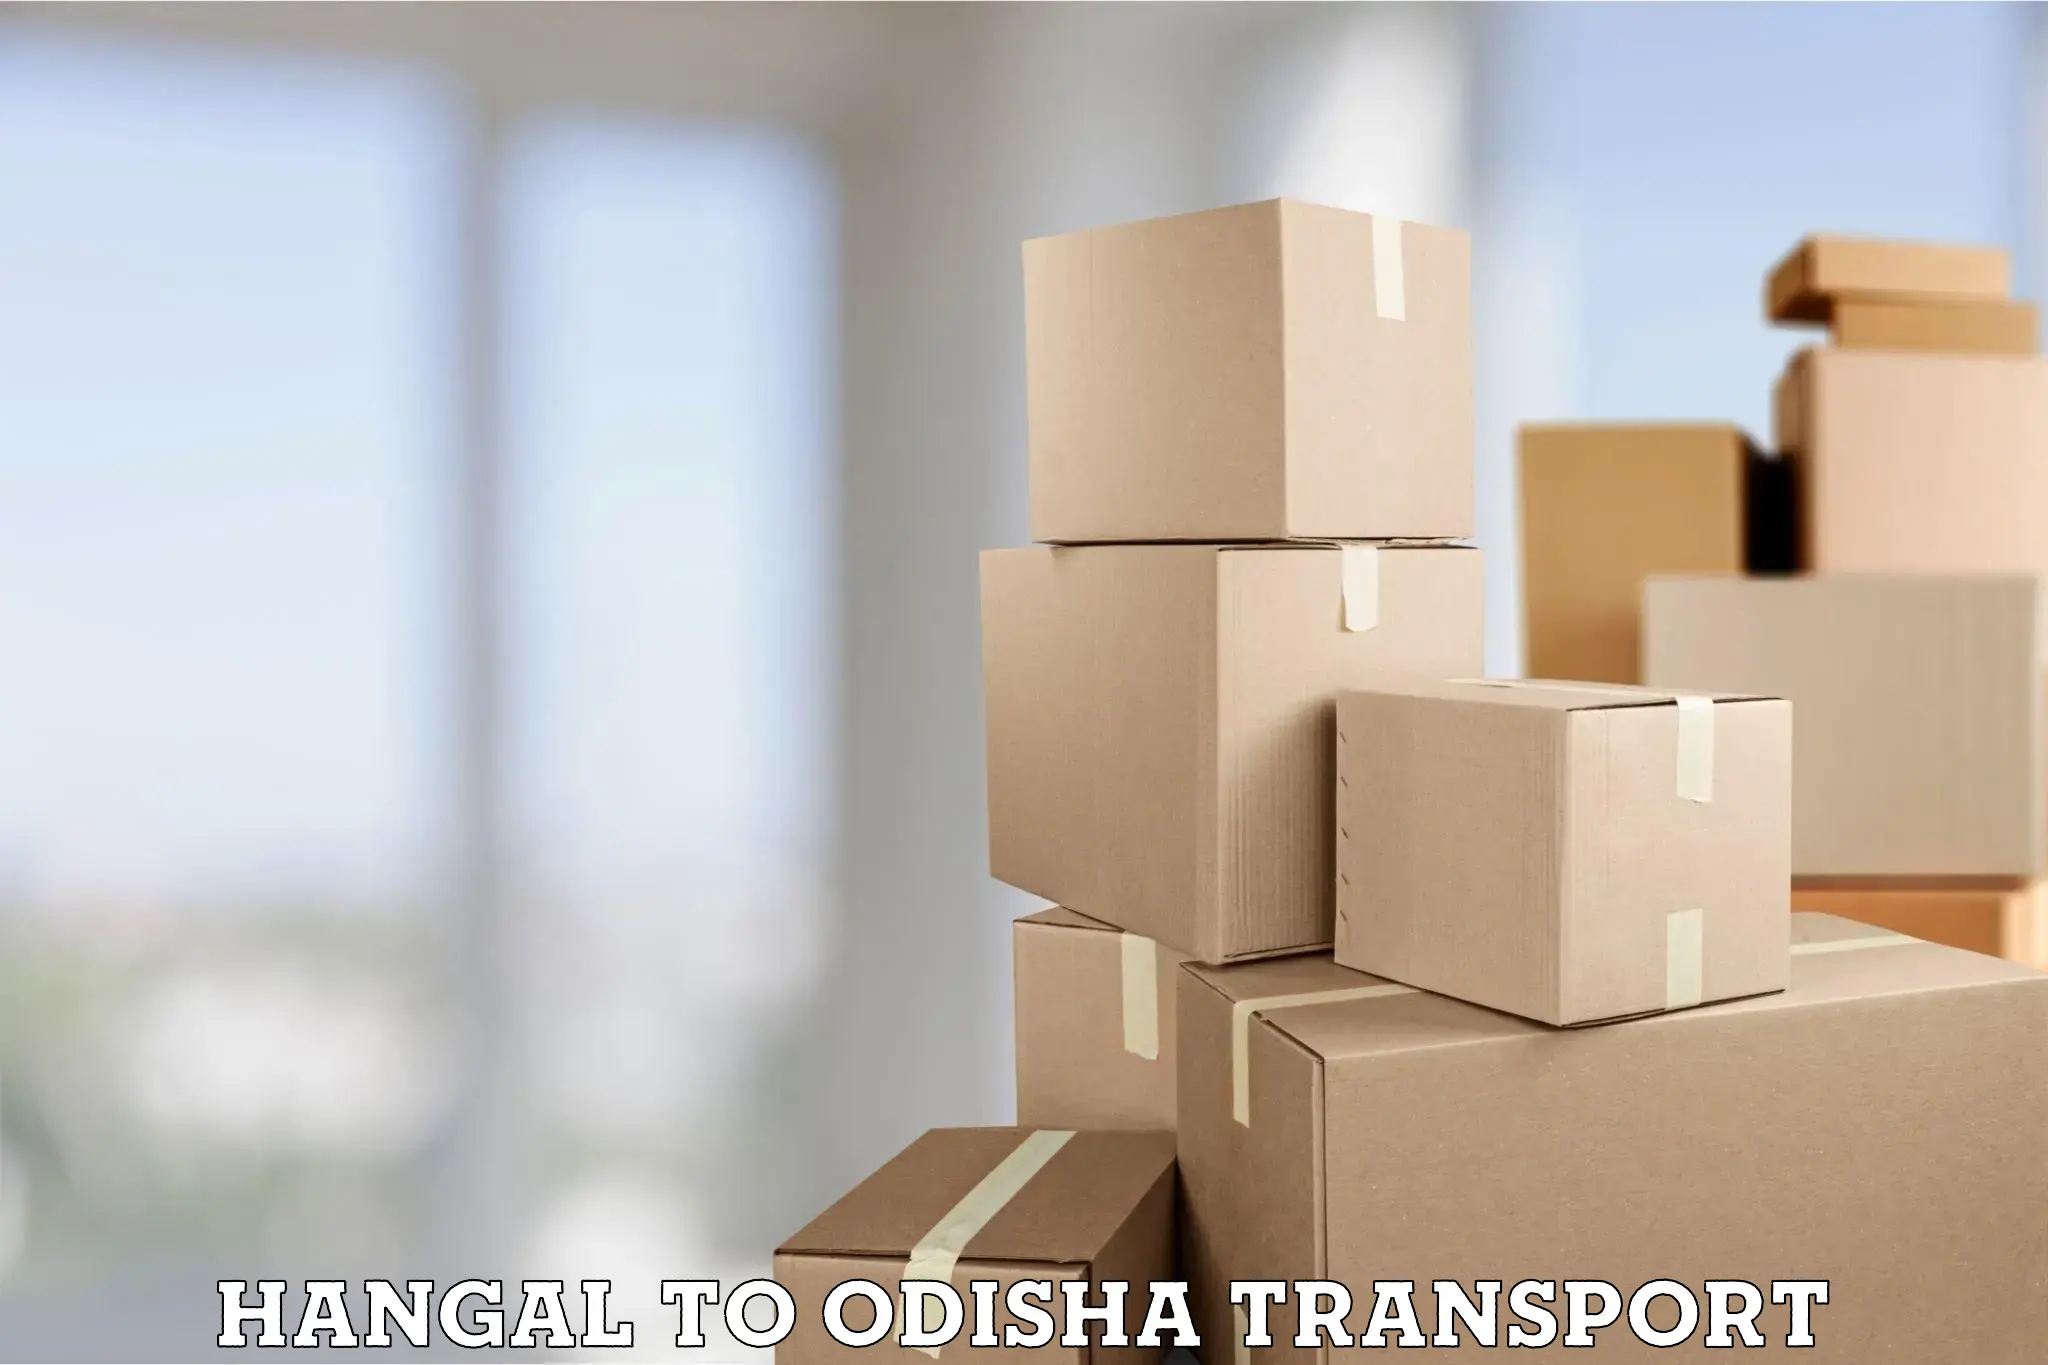 Truck transport companies in India Hangal to Chandipur